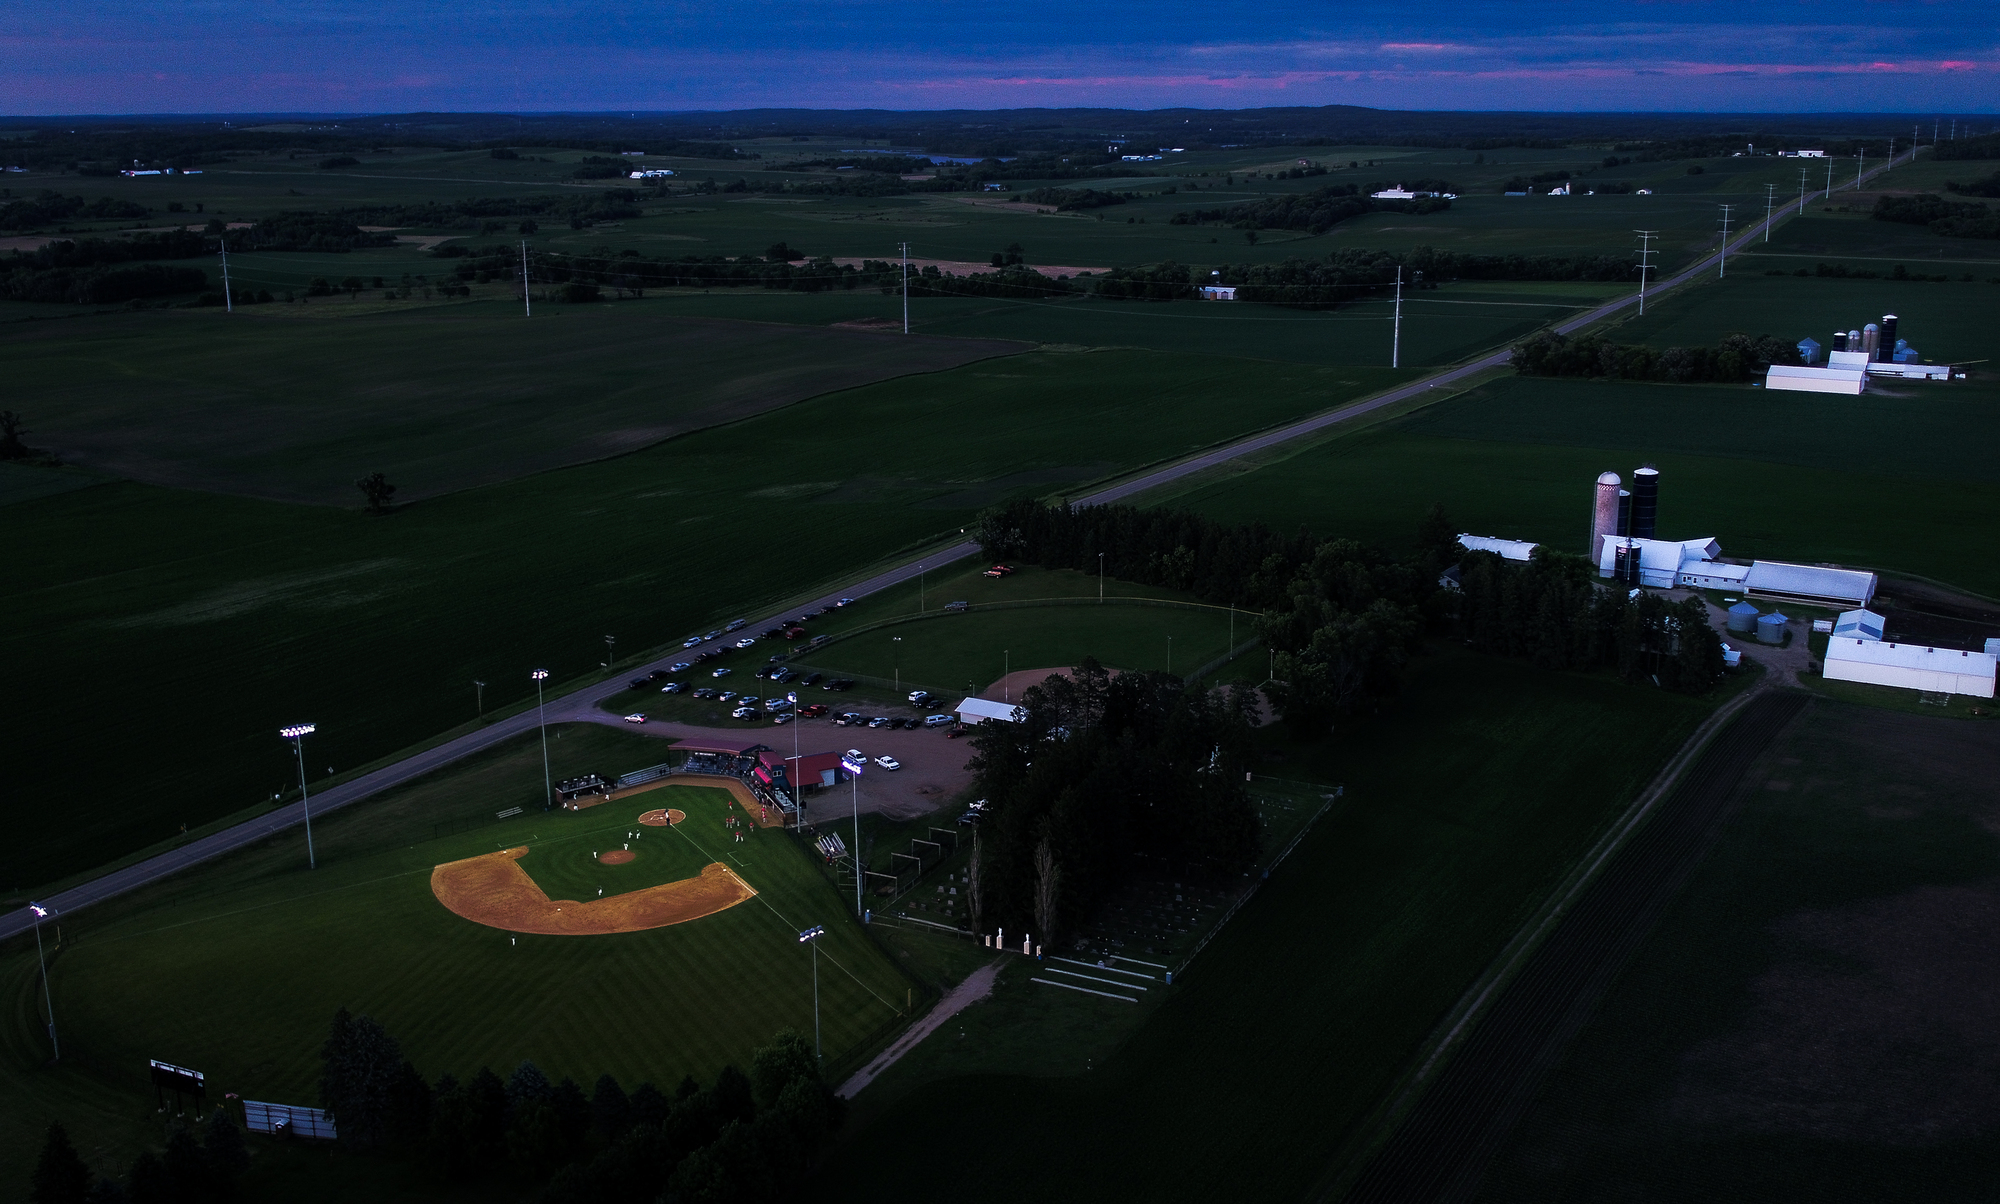 The Farming Flames Baseball Field was illuminated as the sun set on Friday, June 23, 2017 in Farming, Minn. during a tournament game between the Farming Flames and the Sartell Muskies.